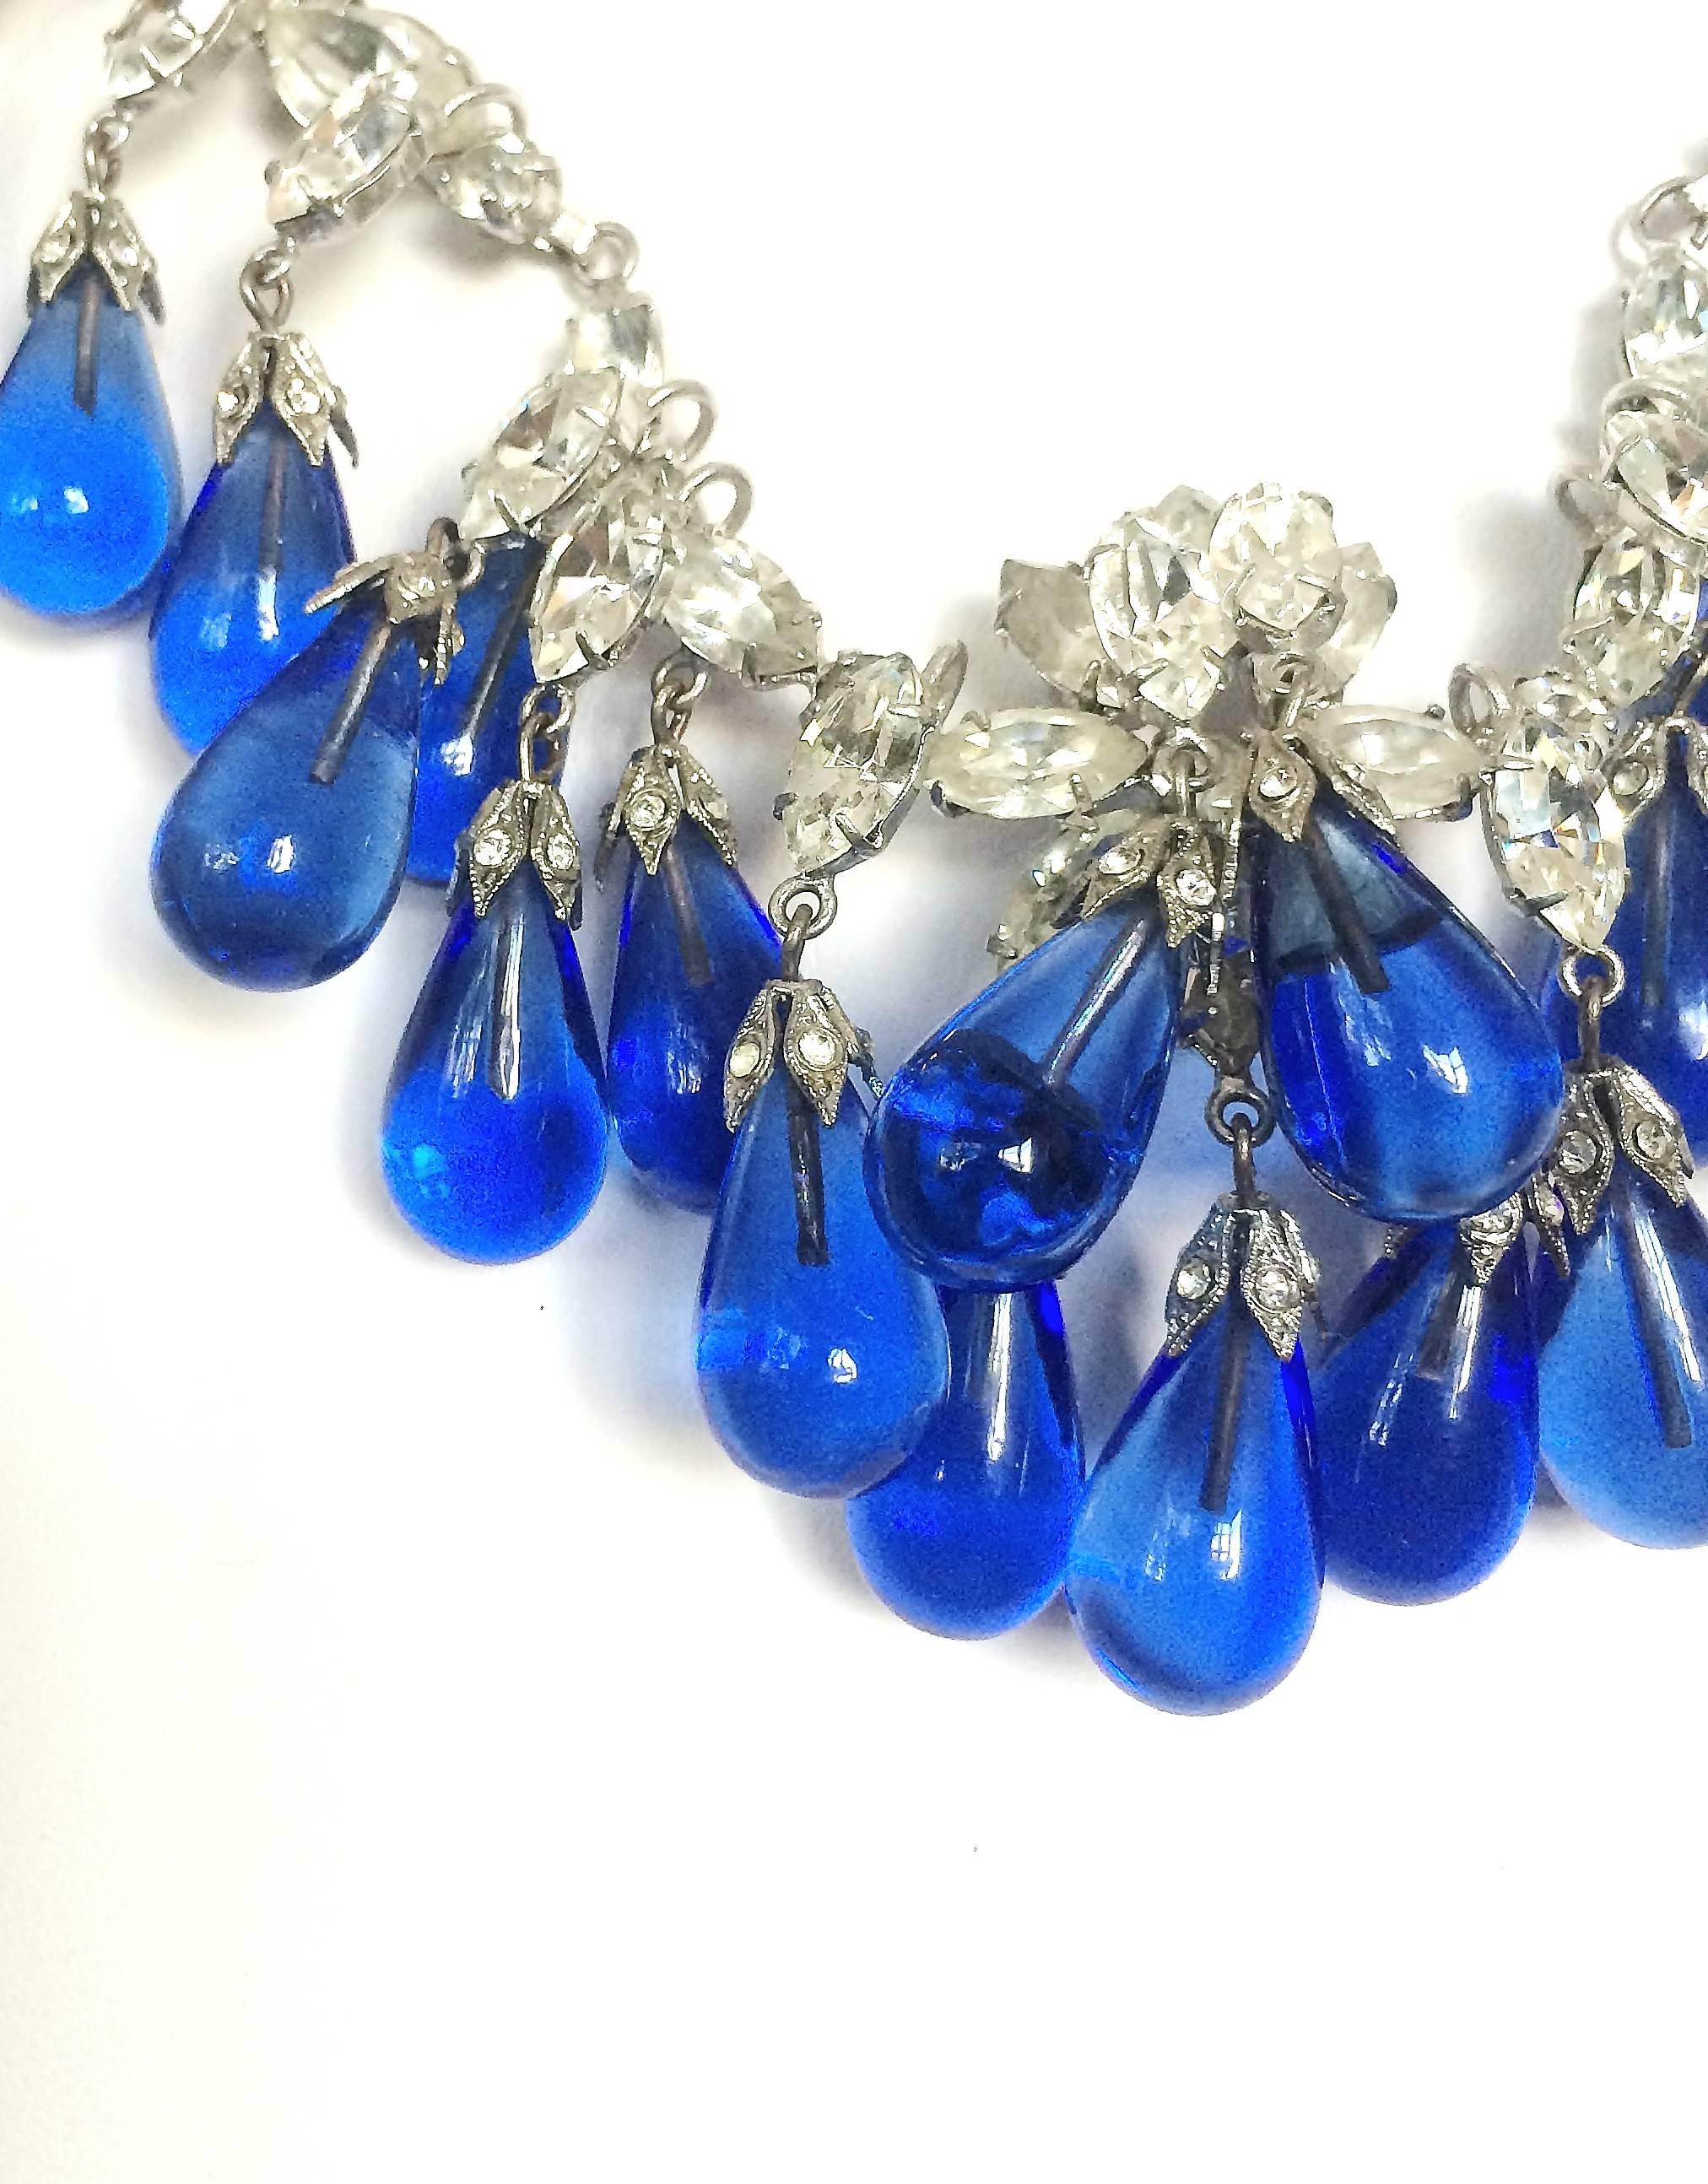 Sumptuous and glamorous, this beautiful necklace is made of poured glass sapphire drops, the main part being set with clear pastes. Each sapphire drop is topped with a jewelled cap. Bearing all the qualities of both a Scemama creation and Dior